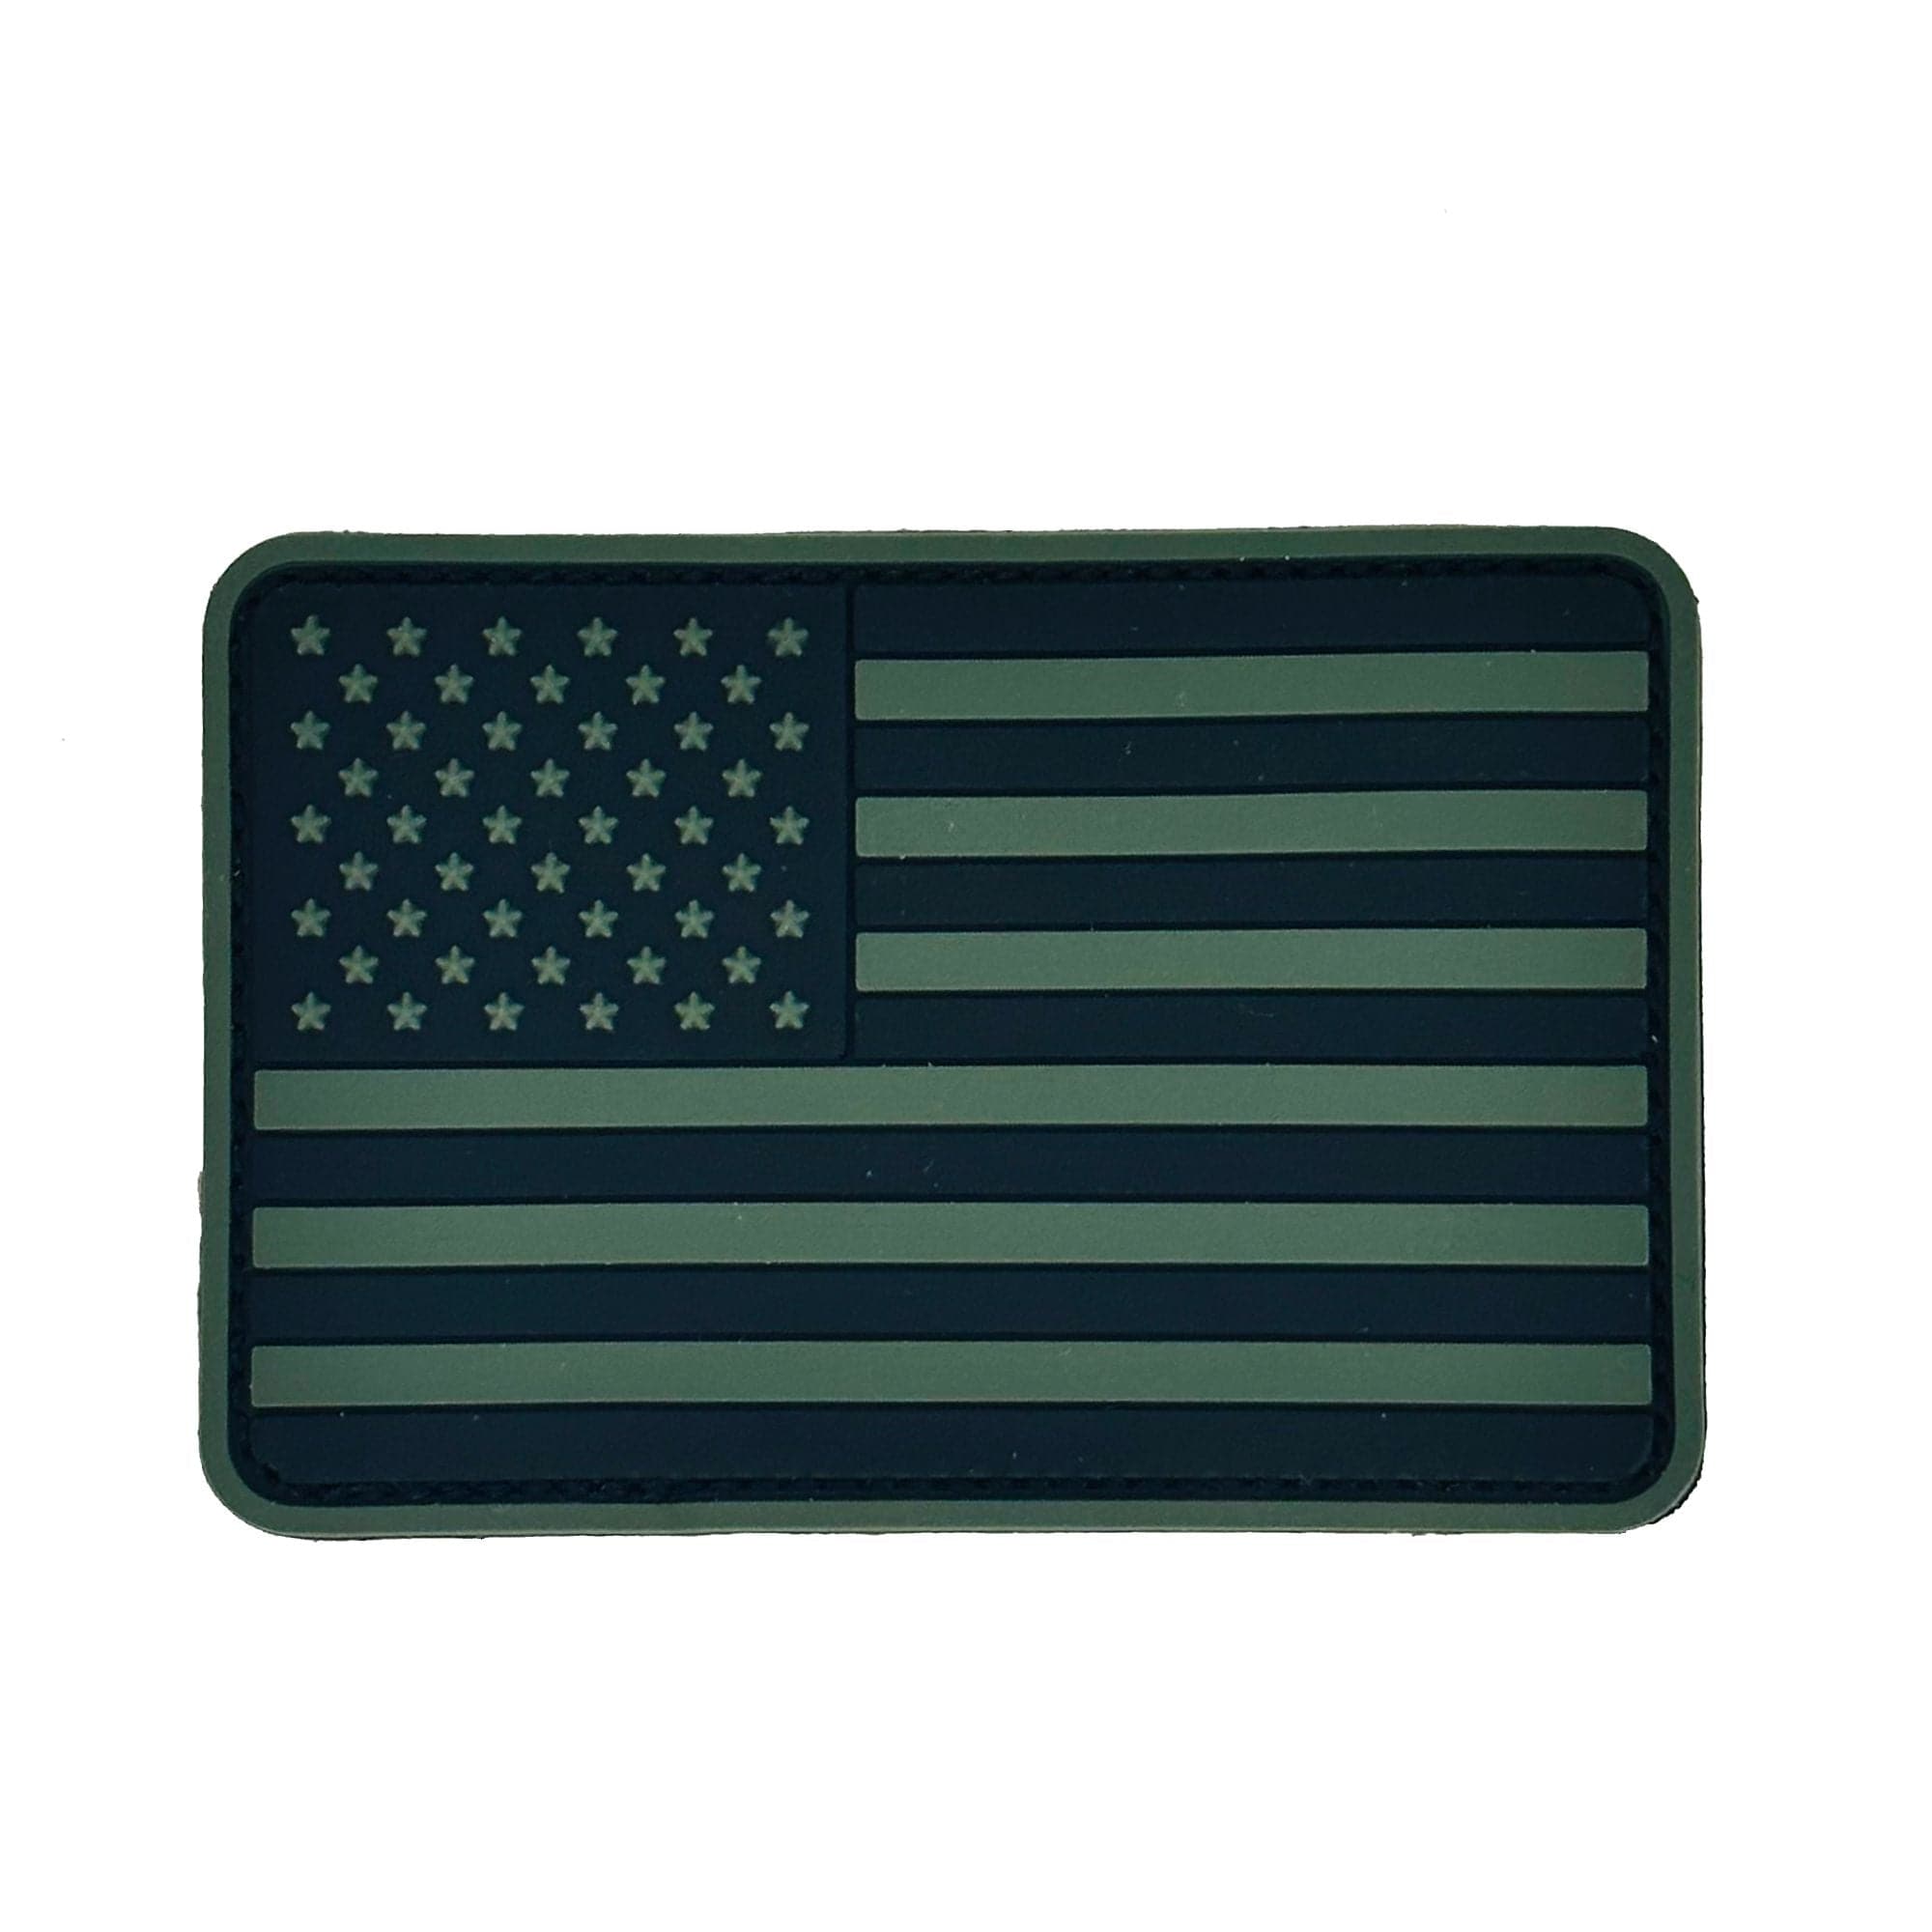 Tactical Gear Junkie Patches Olive Drab US Flag - Rounded Corners - 2"x3" PVC Patch (USA Made)